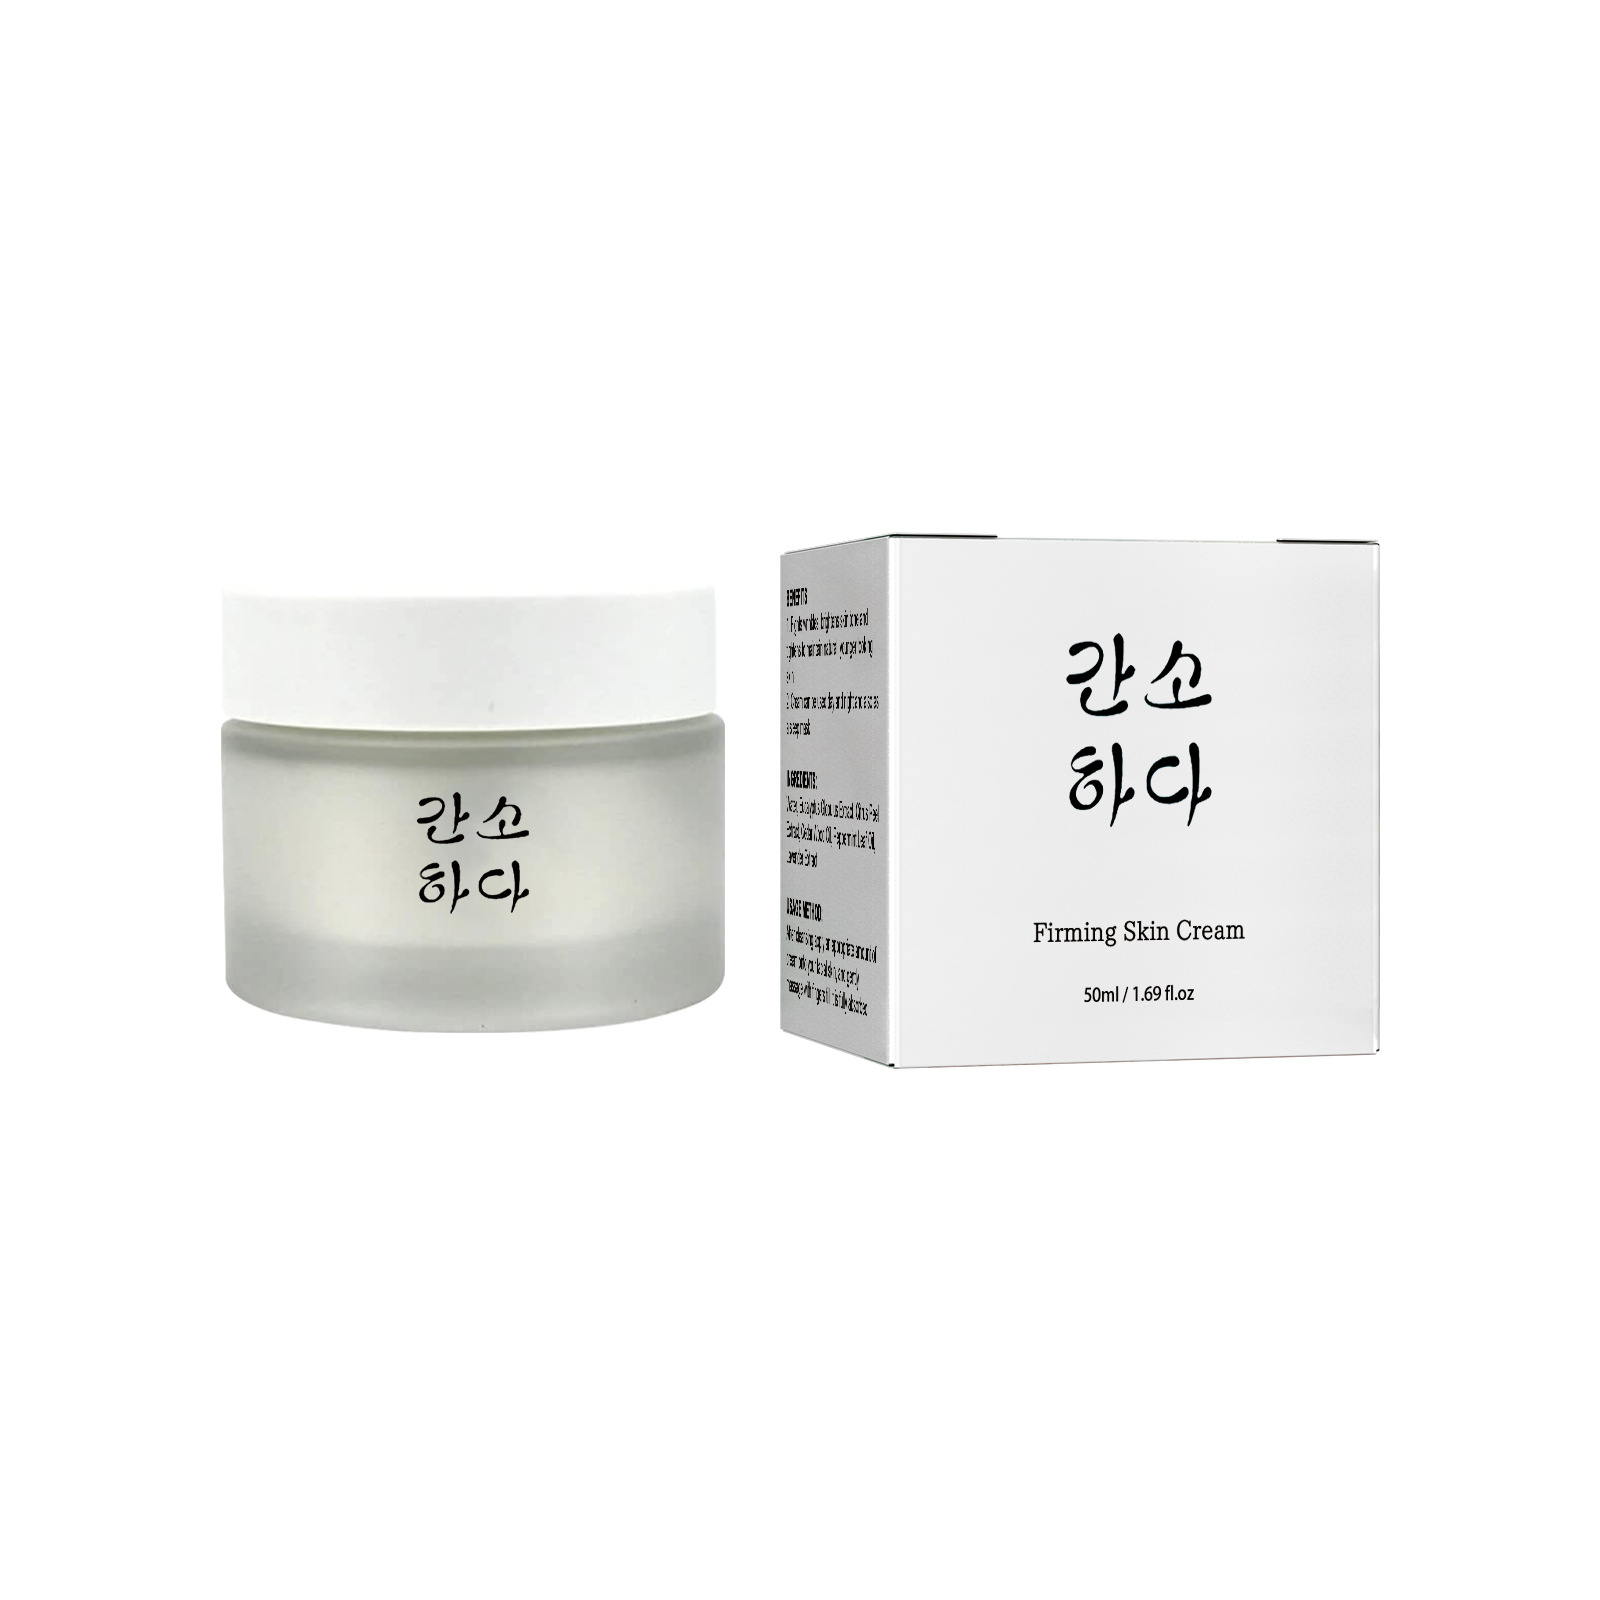 Jaysuing Skin Tightening Cream Hydrating and Fading Fine Lines of Eyes Firming Skin Cream